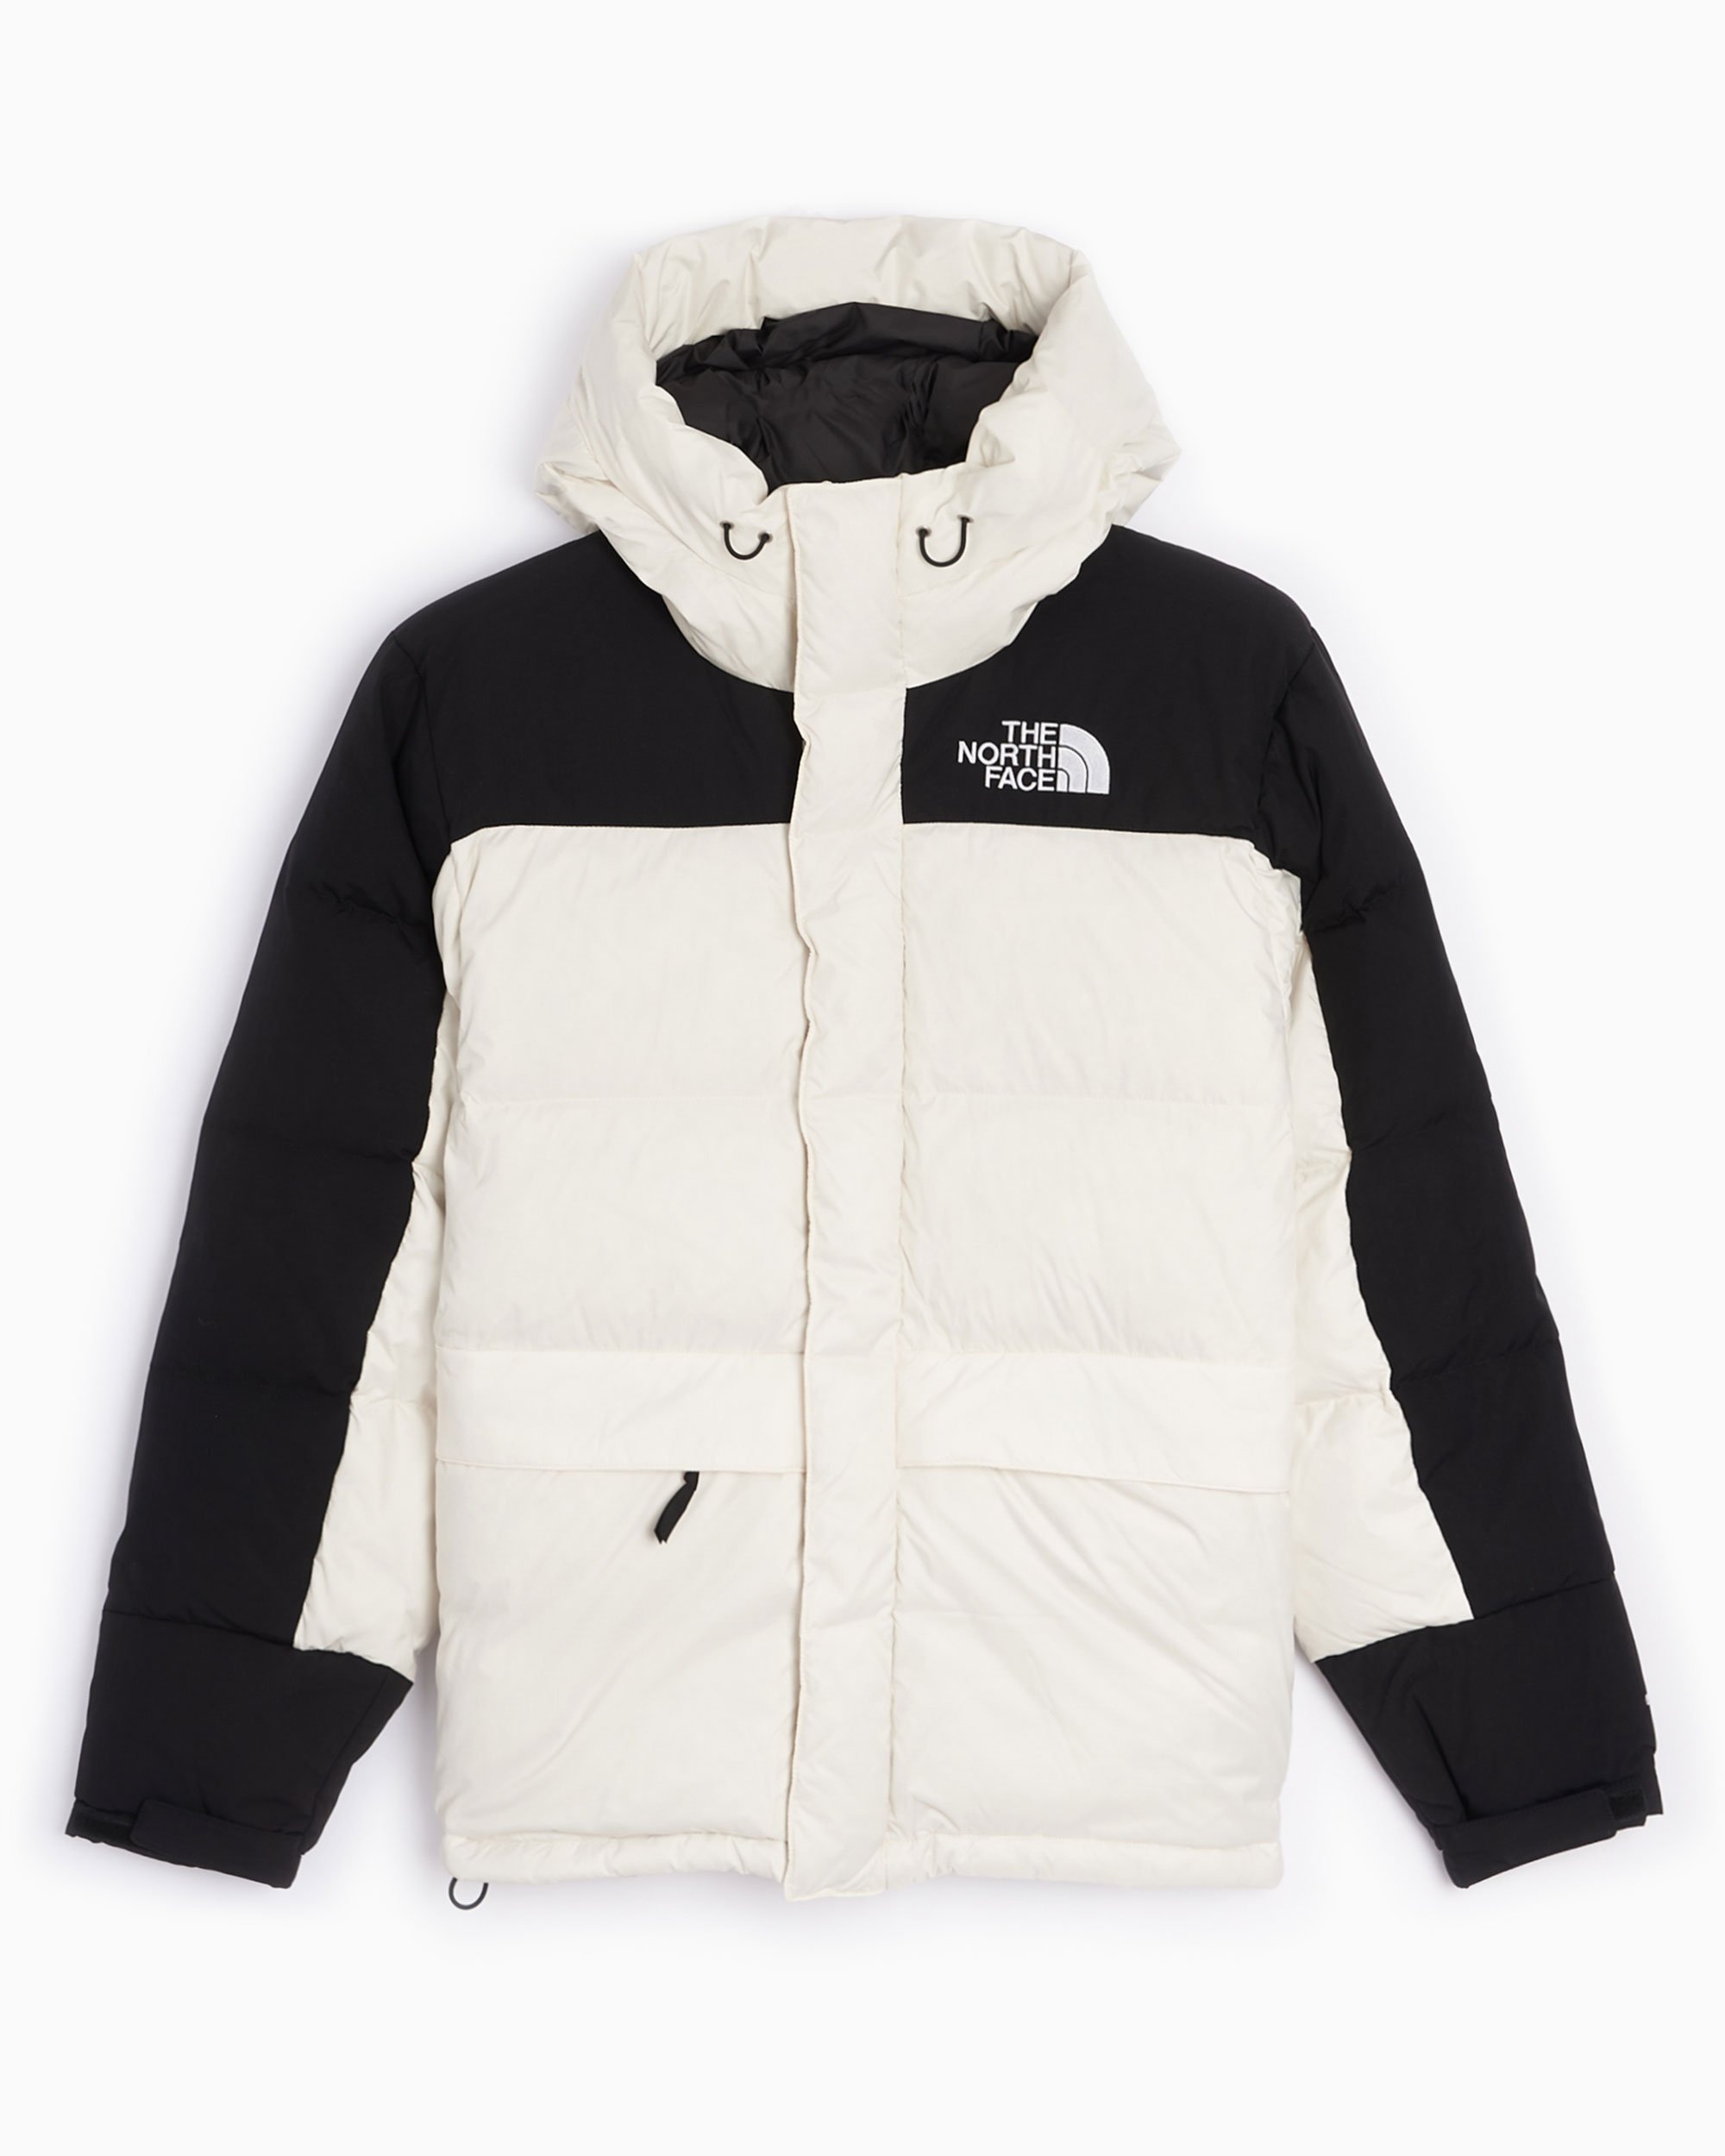 The North Face Himalayan Men's Puffer Jacket Blanco NF0A4QYXN3N1